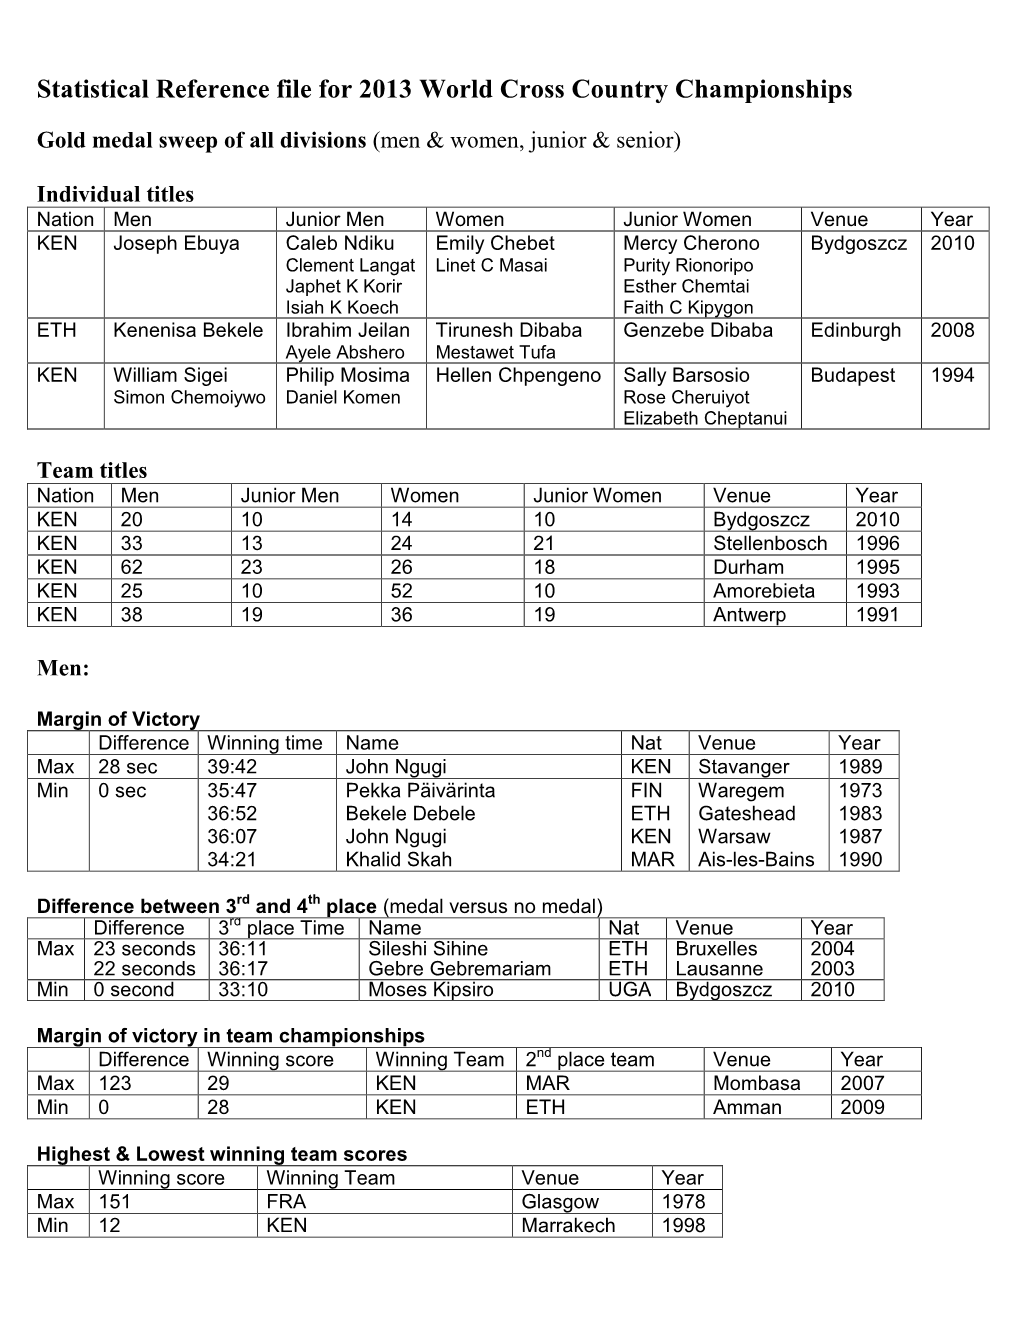 Statistical Reference File for 2013 World Cross Country Championships